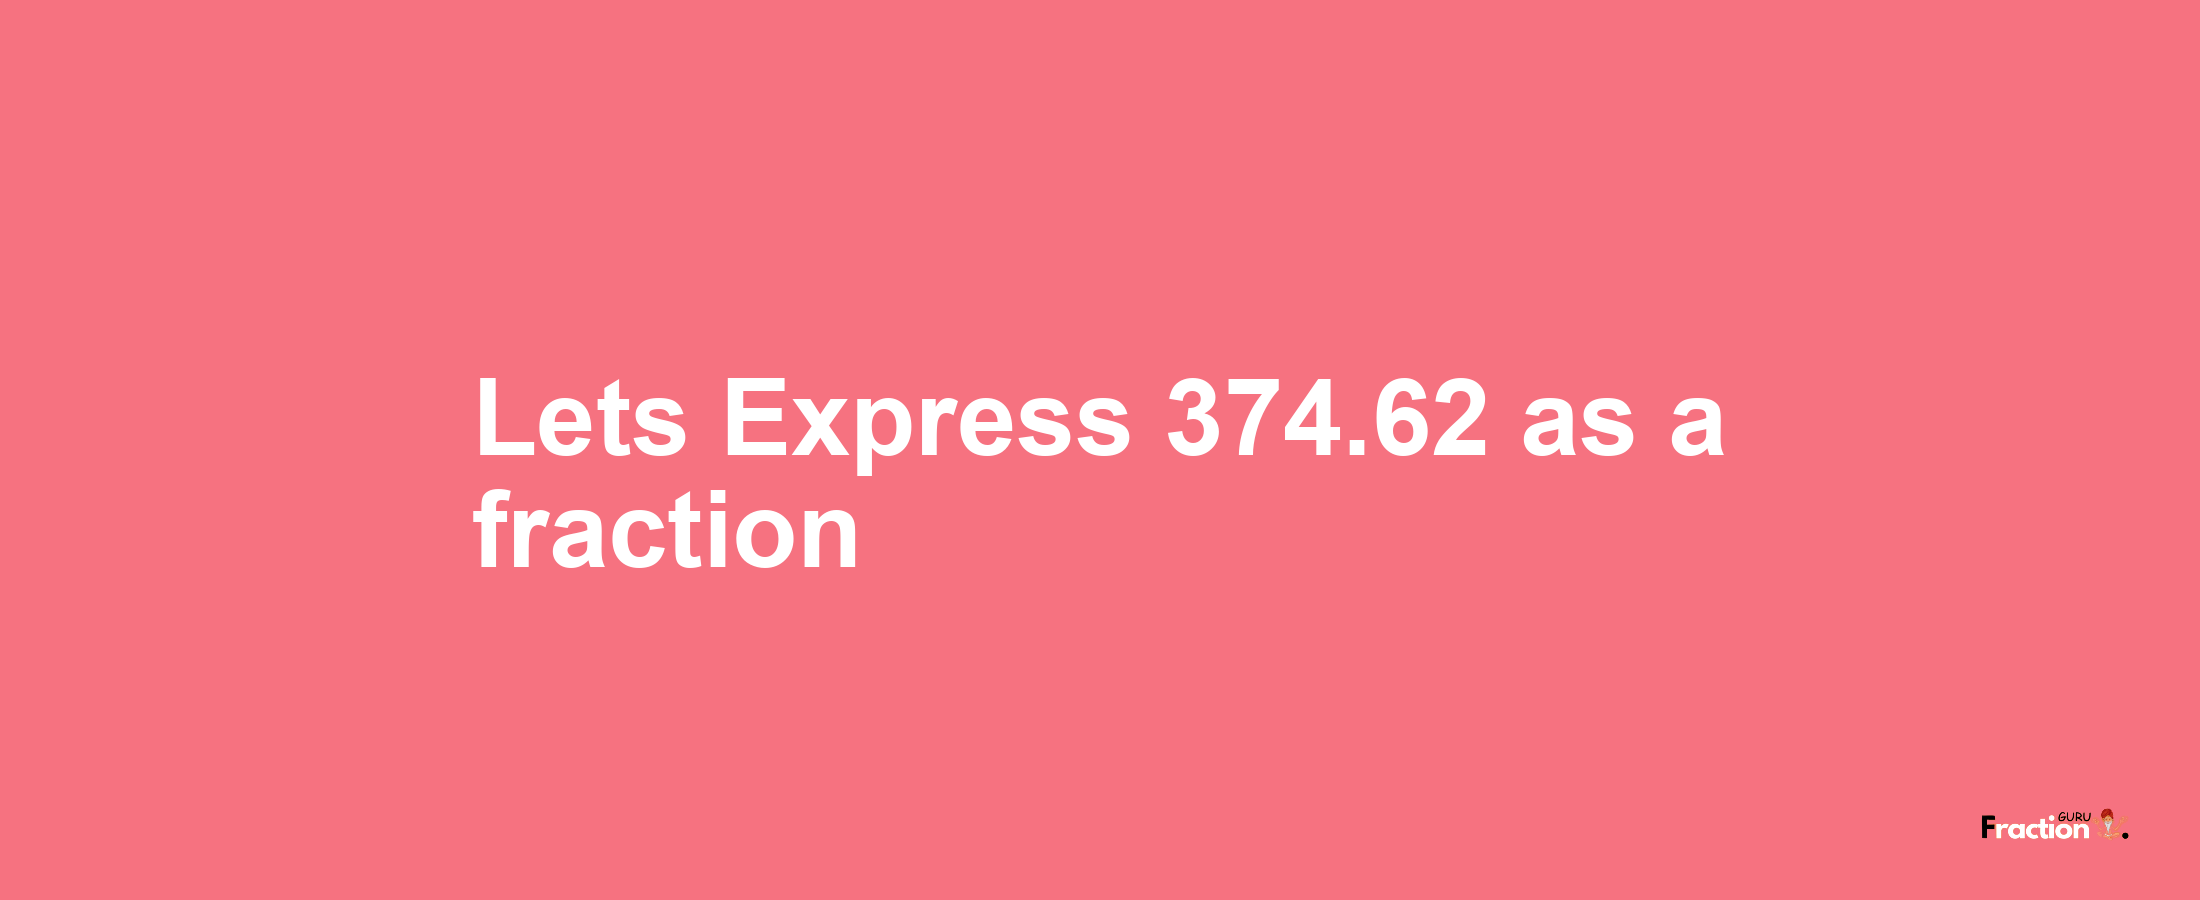 Lets Express 374.62 as afraction